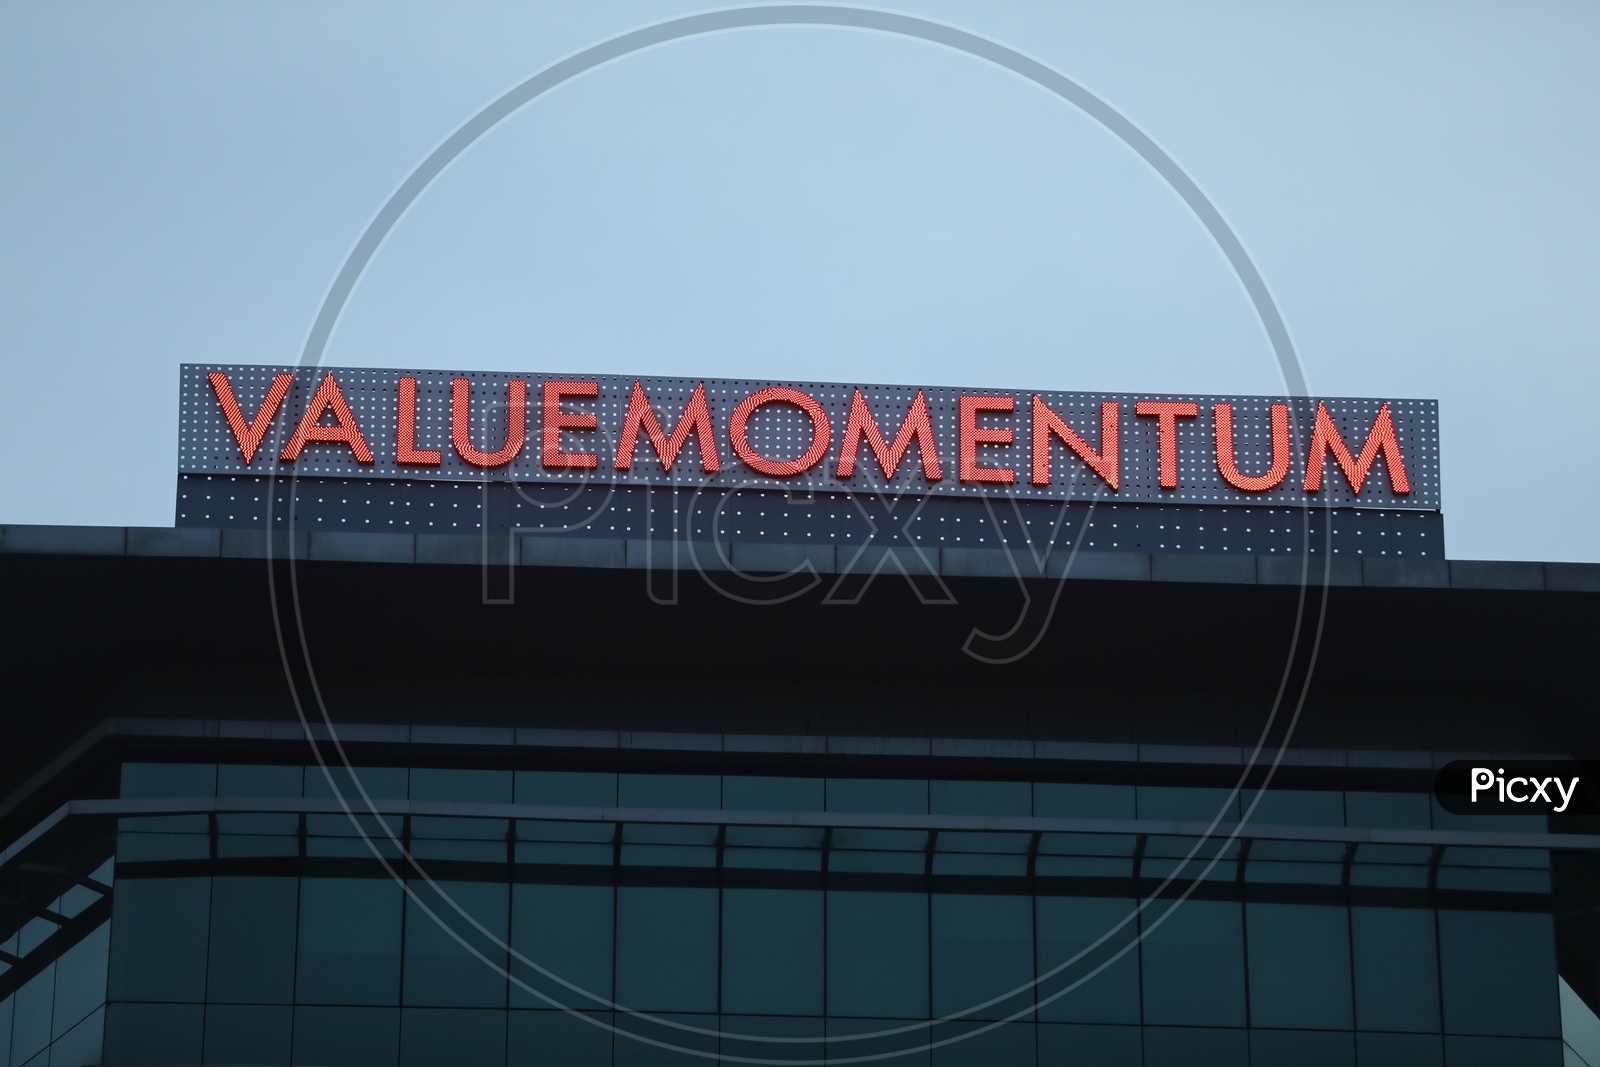 Value momentum  IT & Software Services  Towers